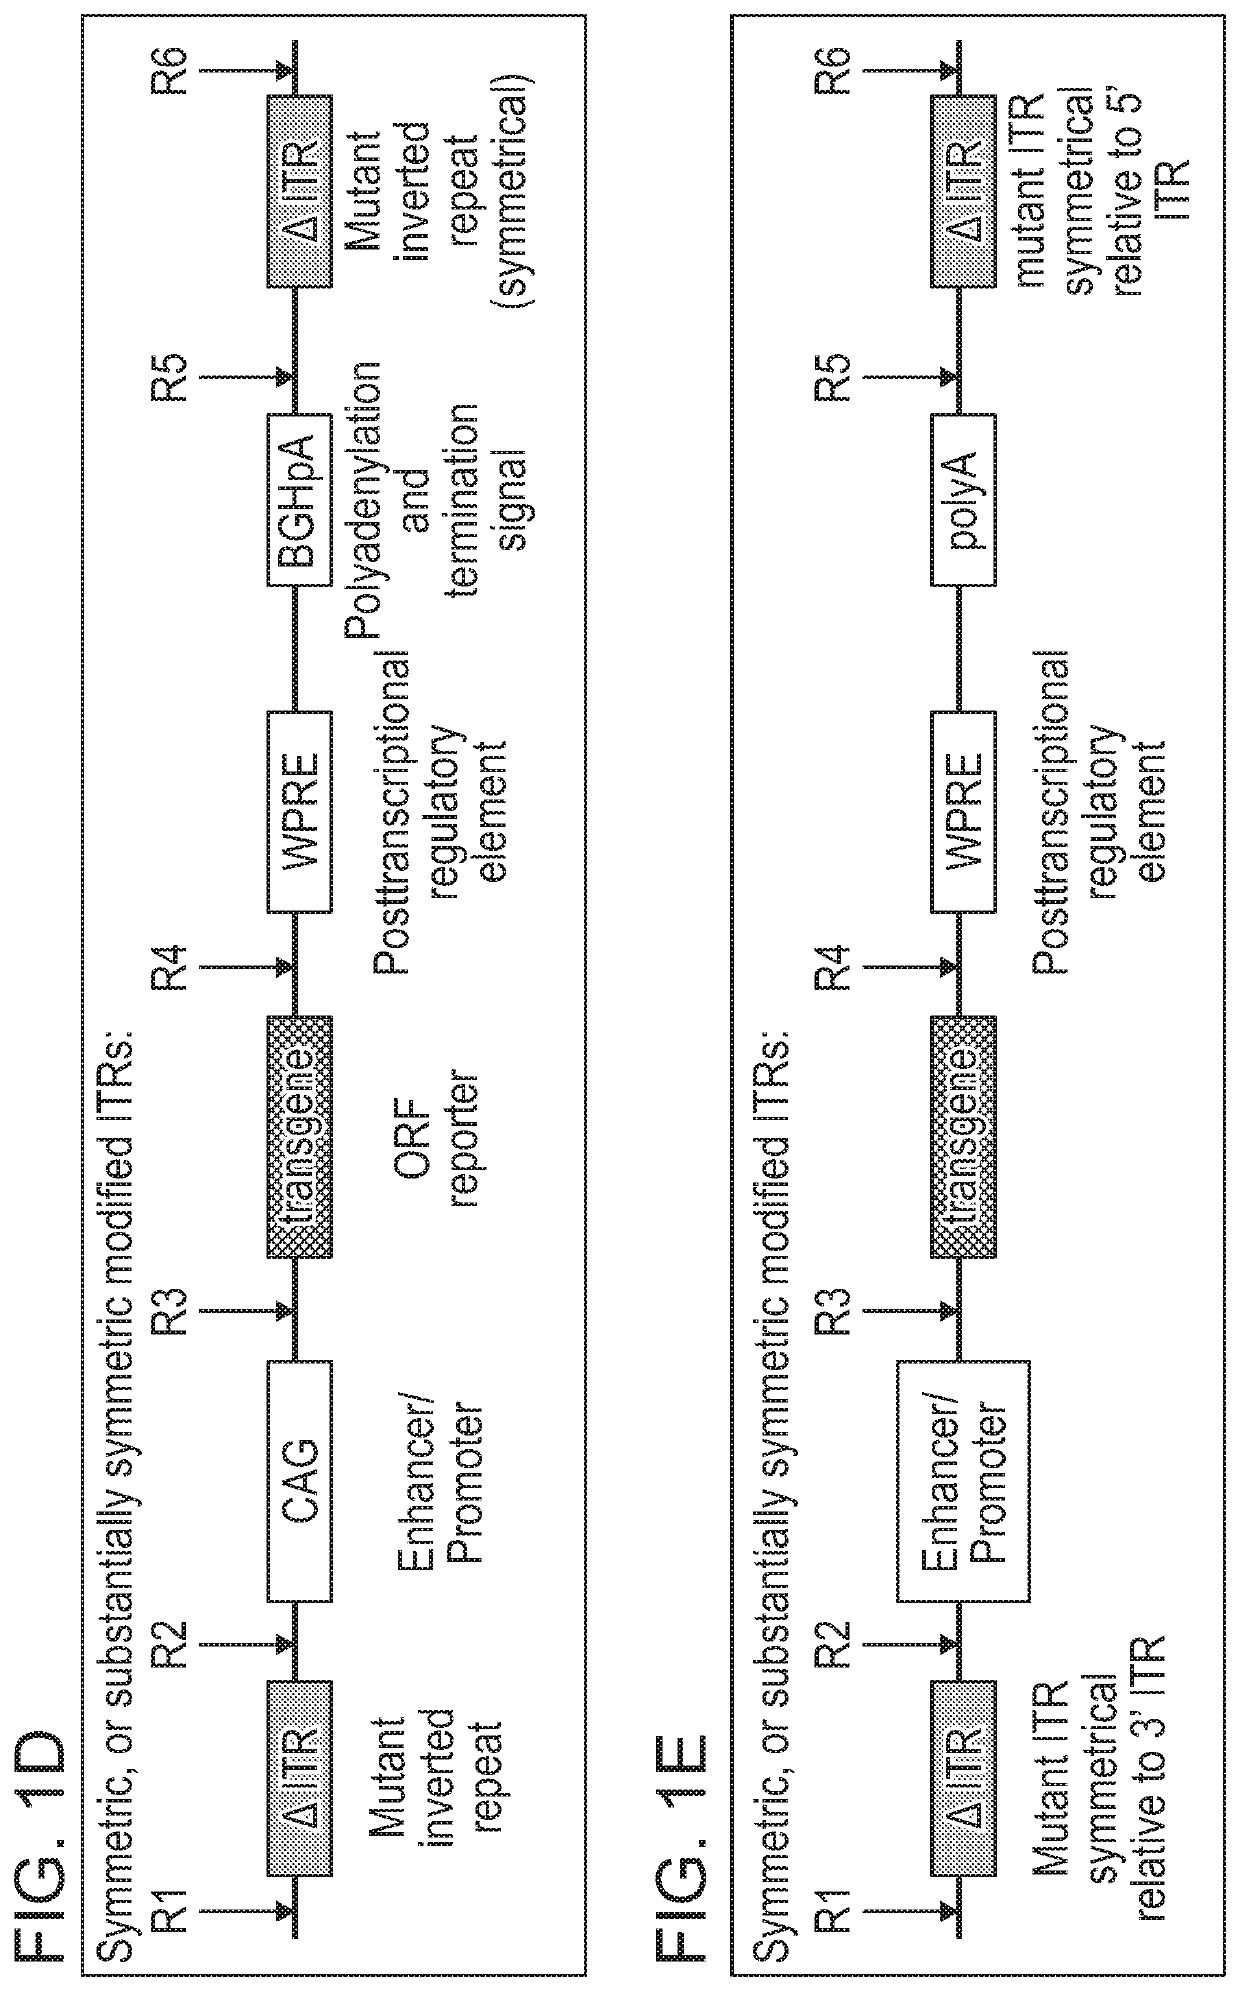 Non-viral DNA vectors and uses thereof for expressing fviii therapeutics